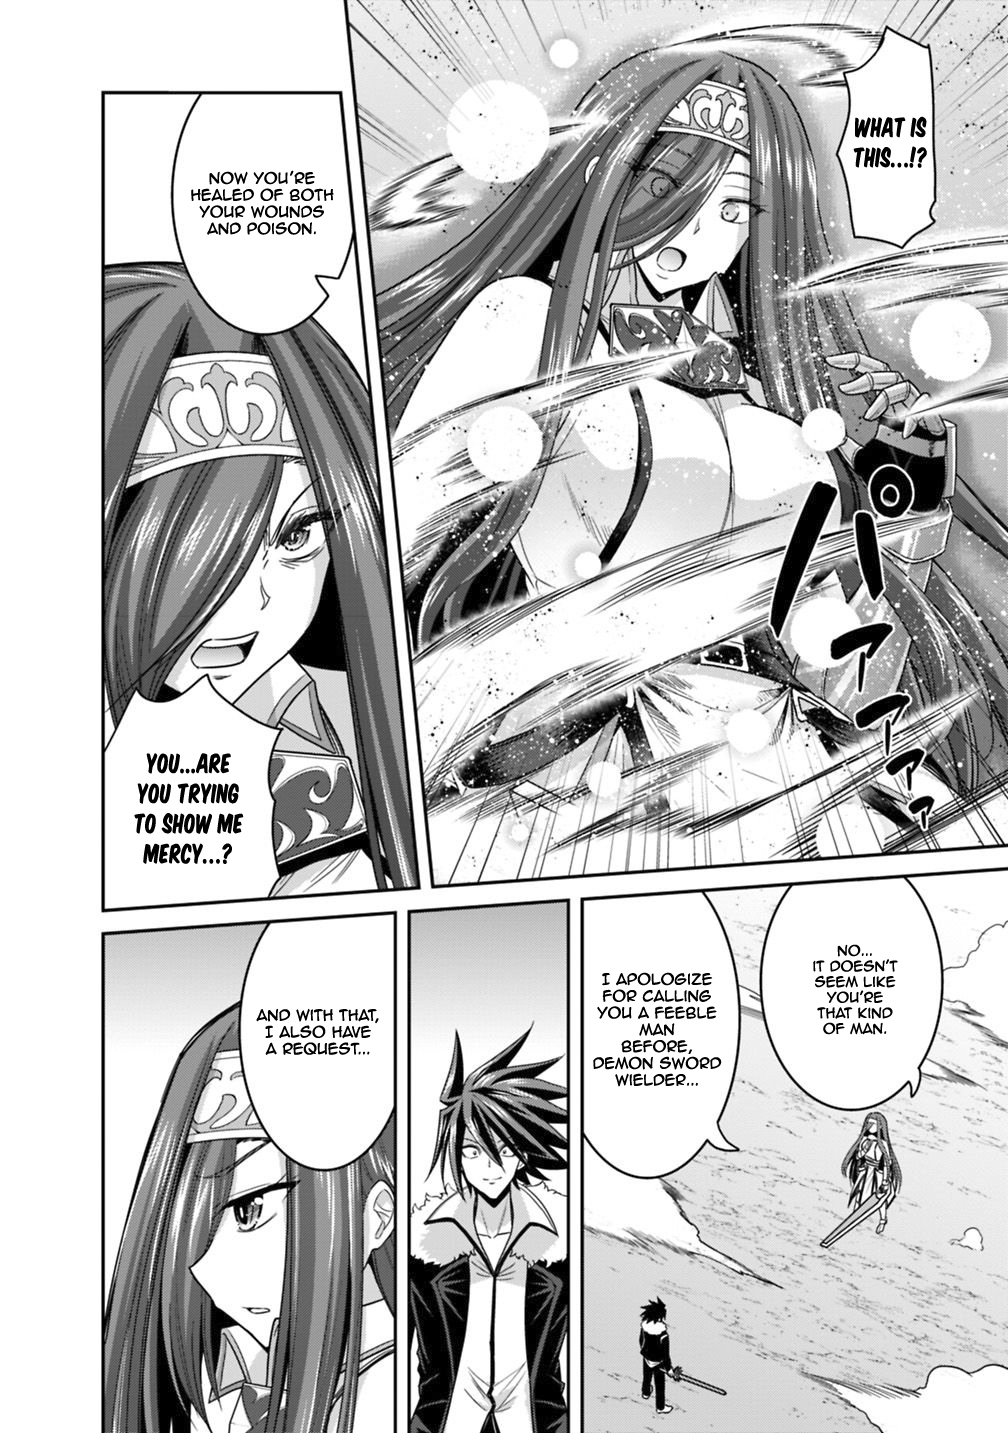 Kujibiki Tokushou Musou Harem-Ken Vol.4 Chapter 16.1: Duel! The End Of A Match With Their Pride On The Line... - Picture 3